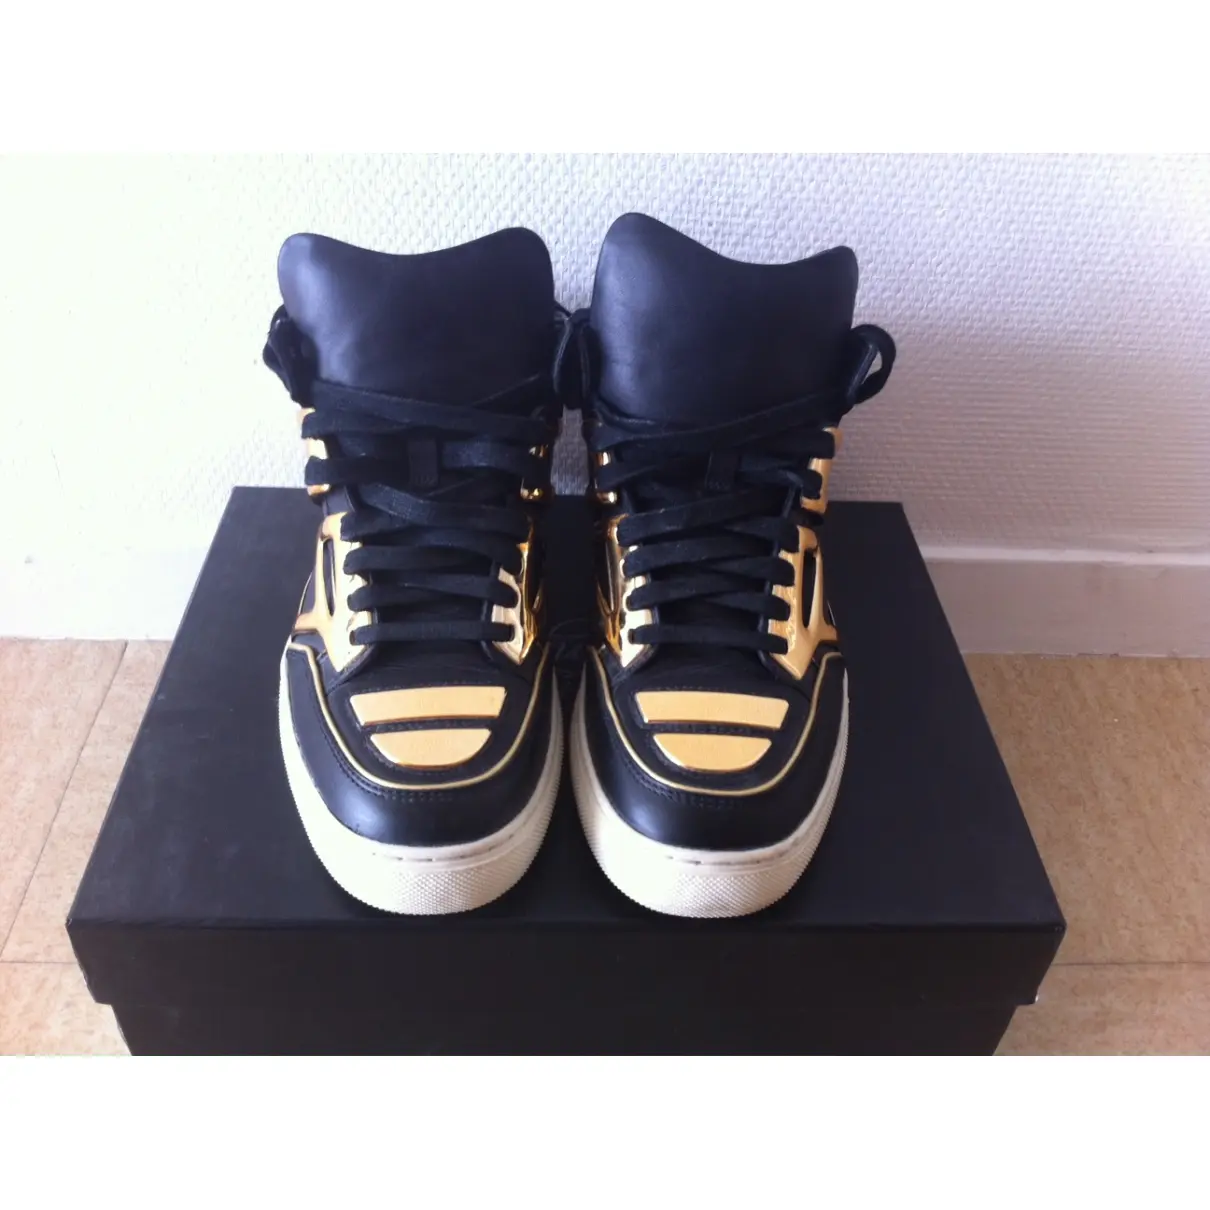 Buy Alejandro Ingelmo Leather high trainers online